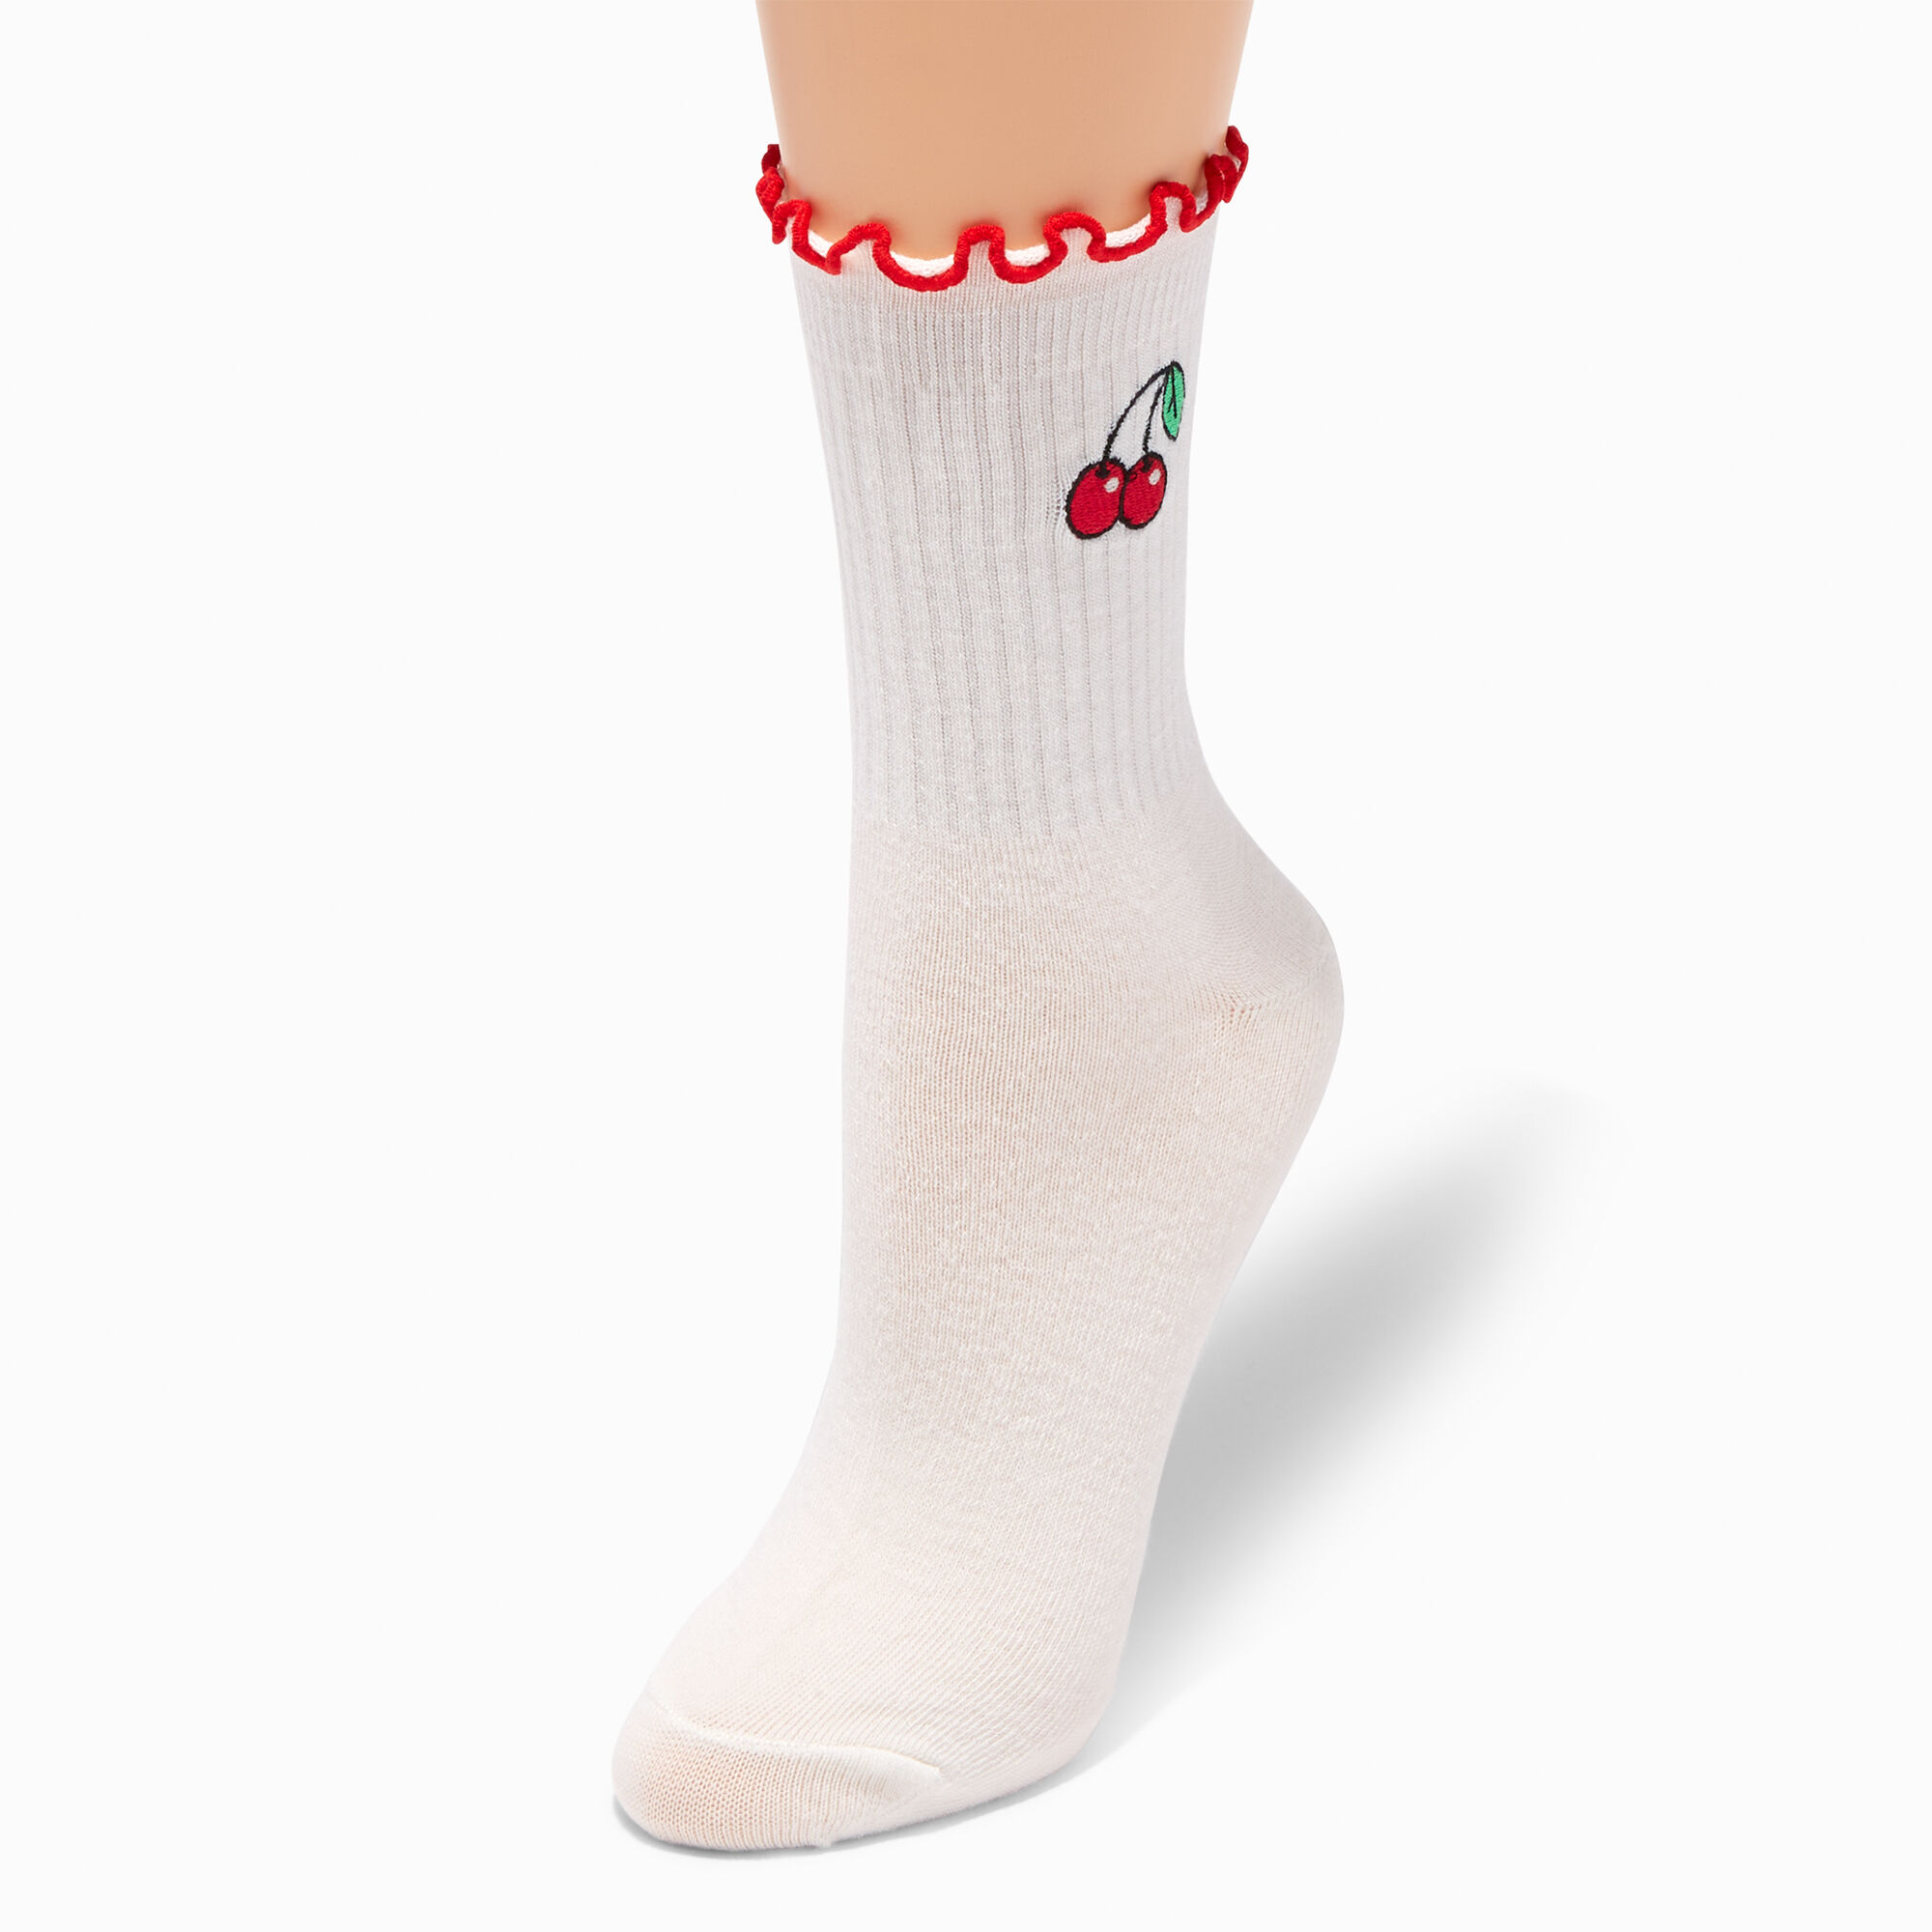 View Claires Embroidered Cherries Crew Socks White information